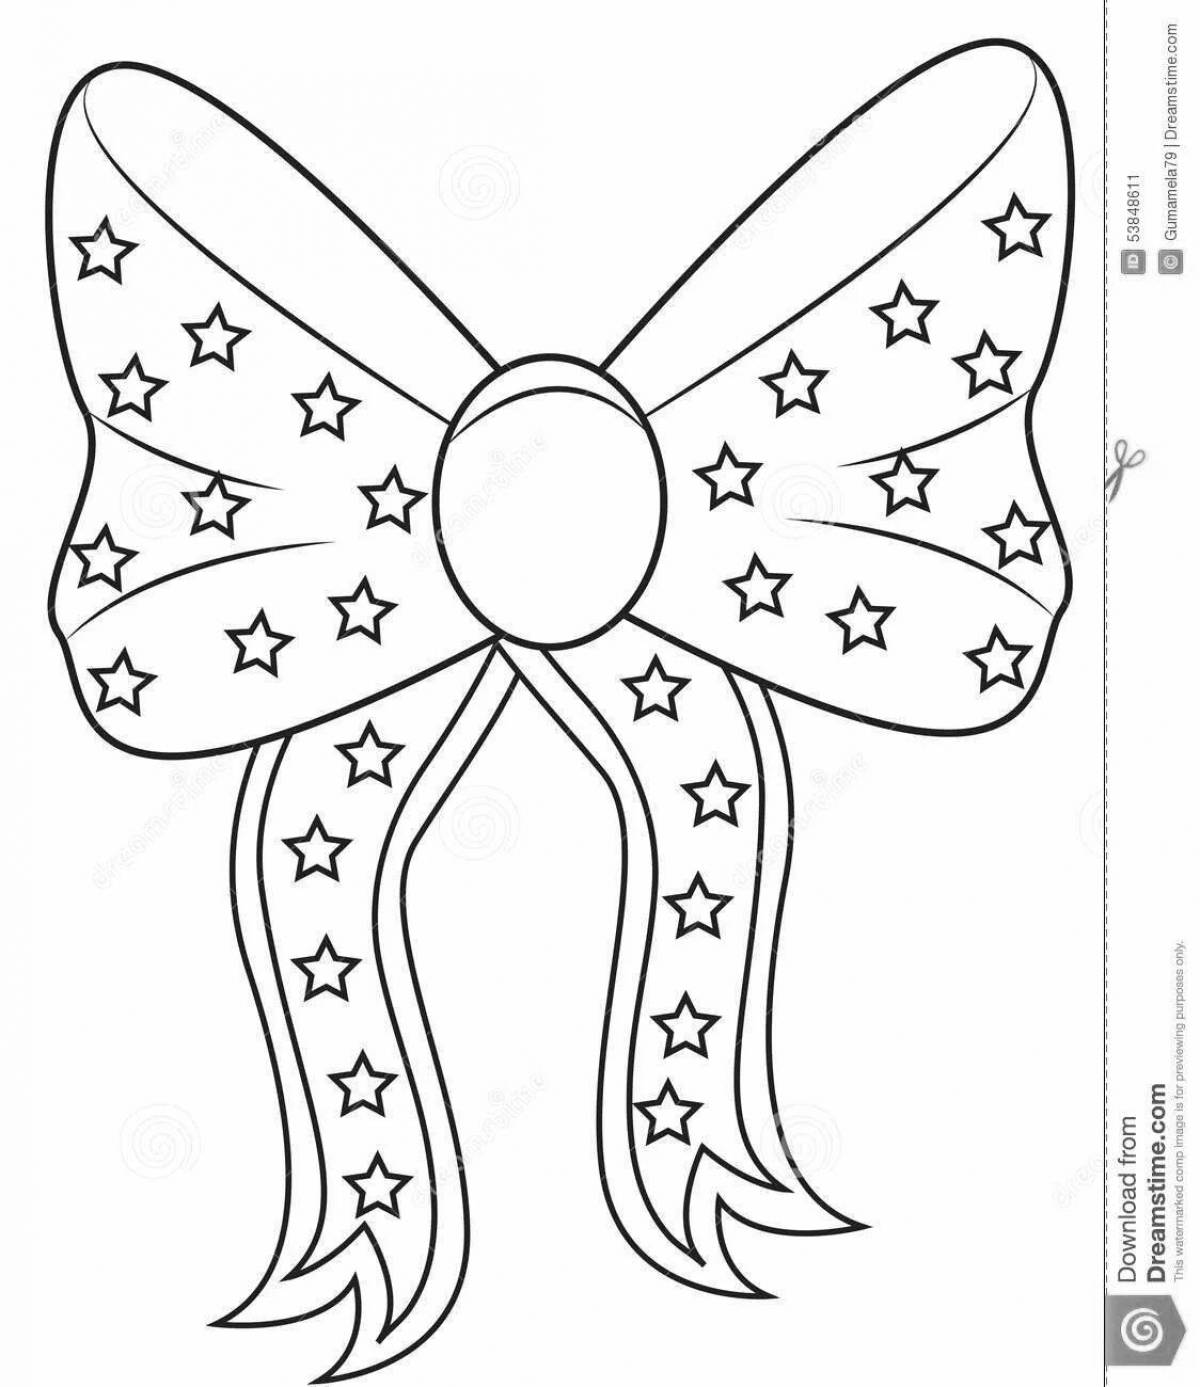 Colorful coloring page with bows for the little ones